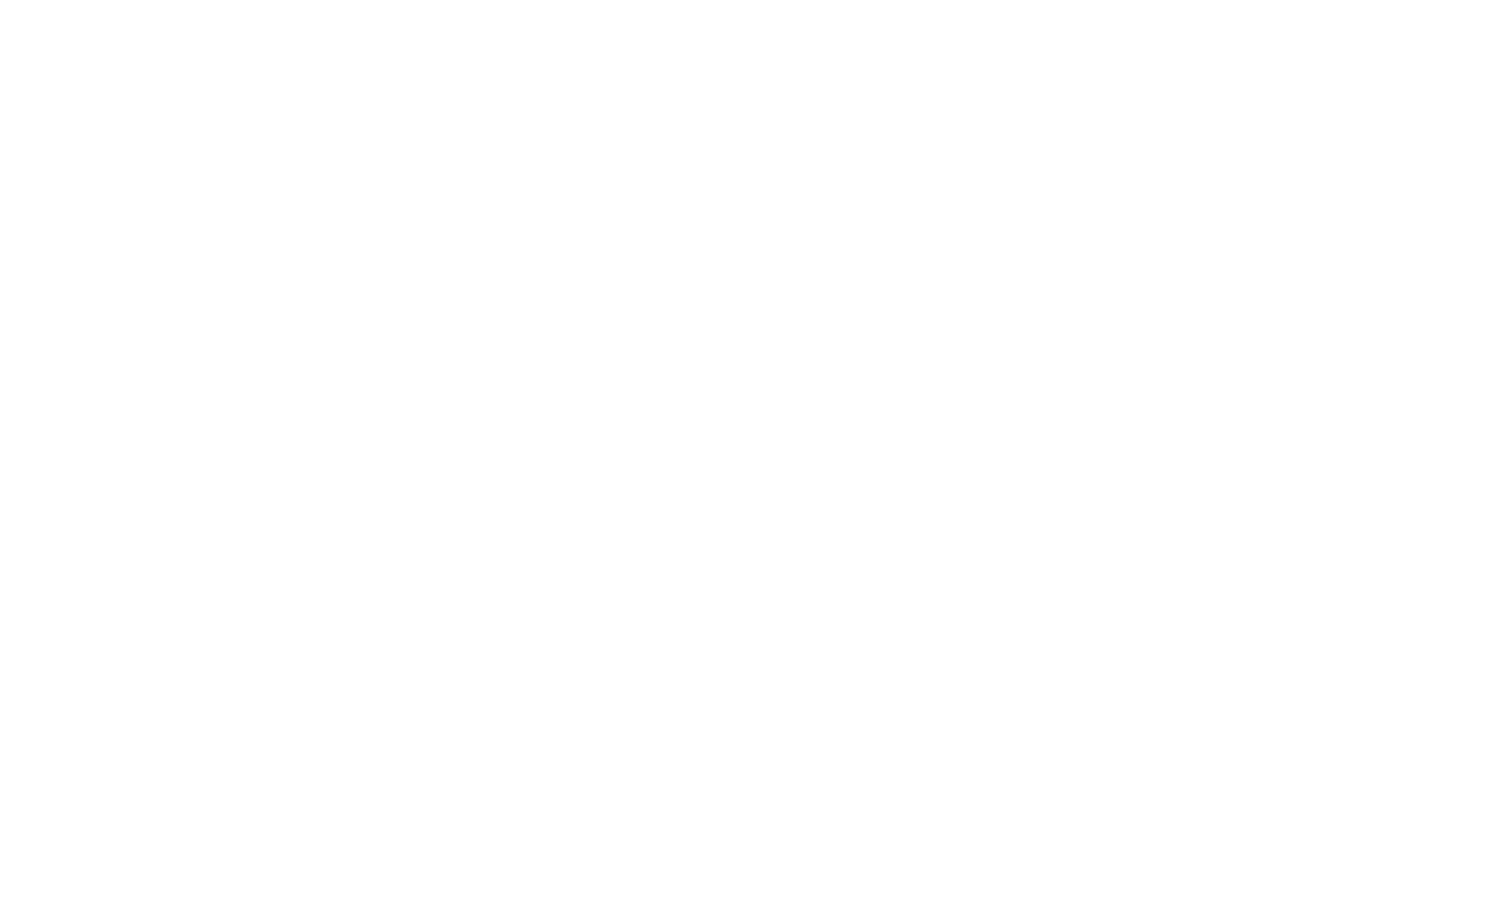 The Aesthetic Treatment Rooms 